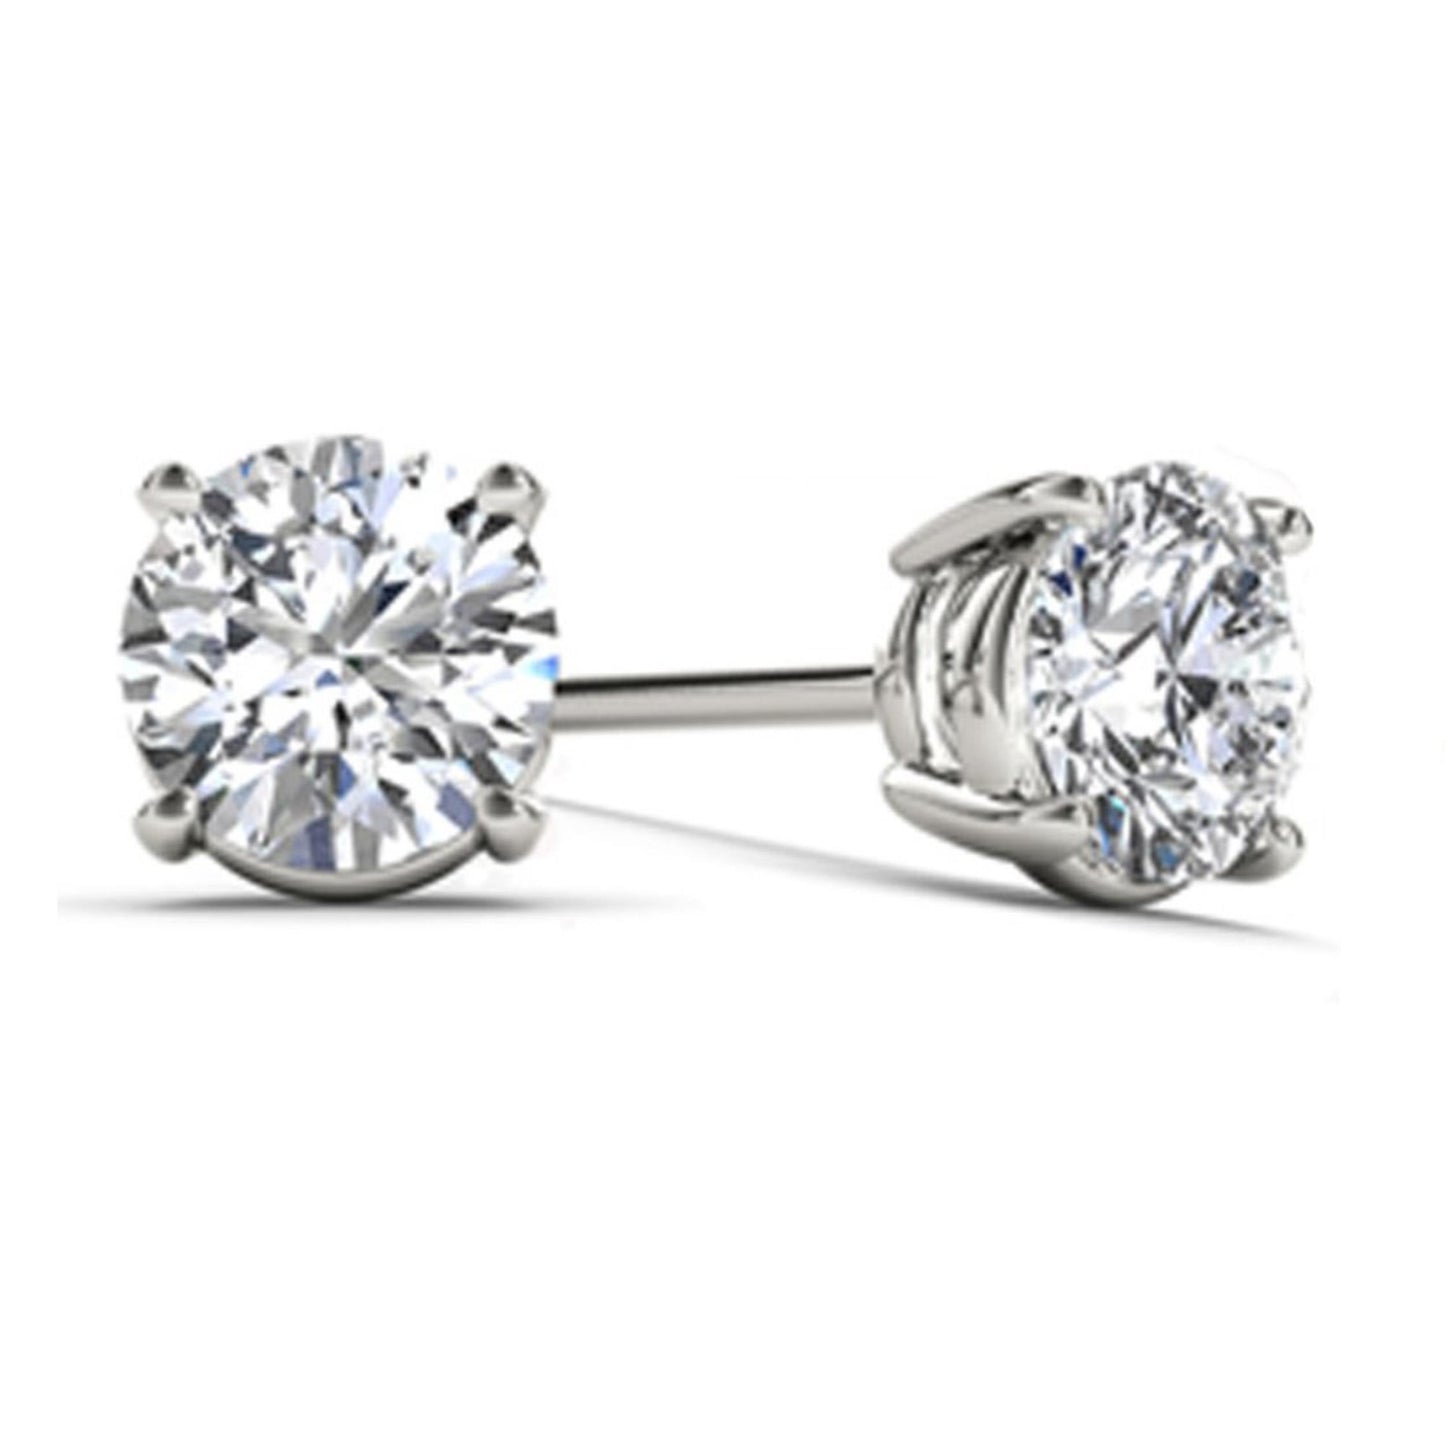 14Kt White Gold 0.30 Ct Genuine Natural Diamond Round Stud Earrings